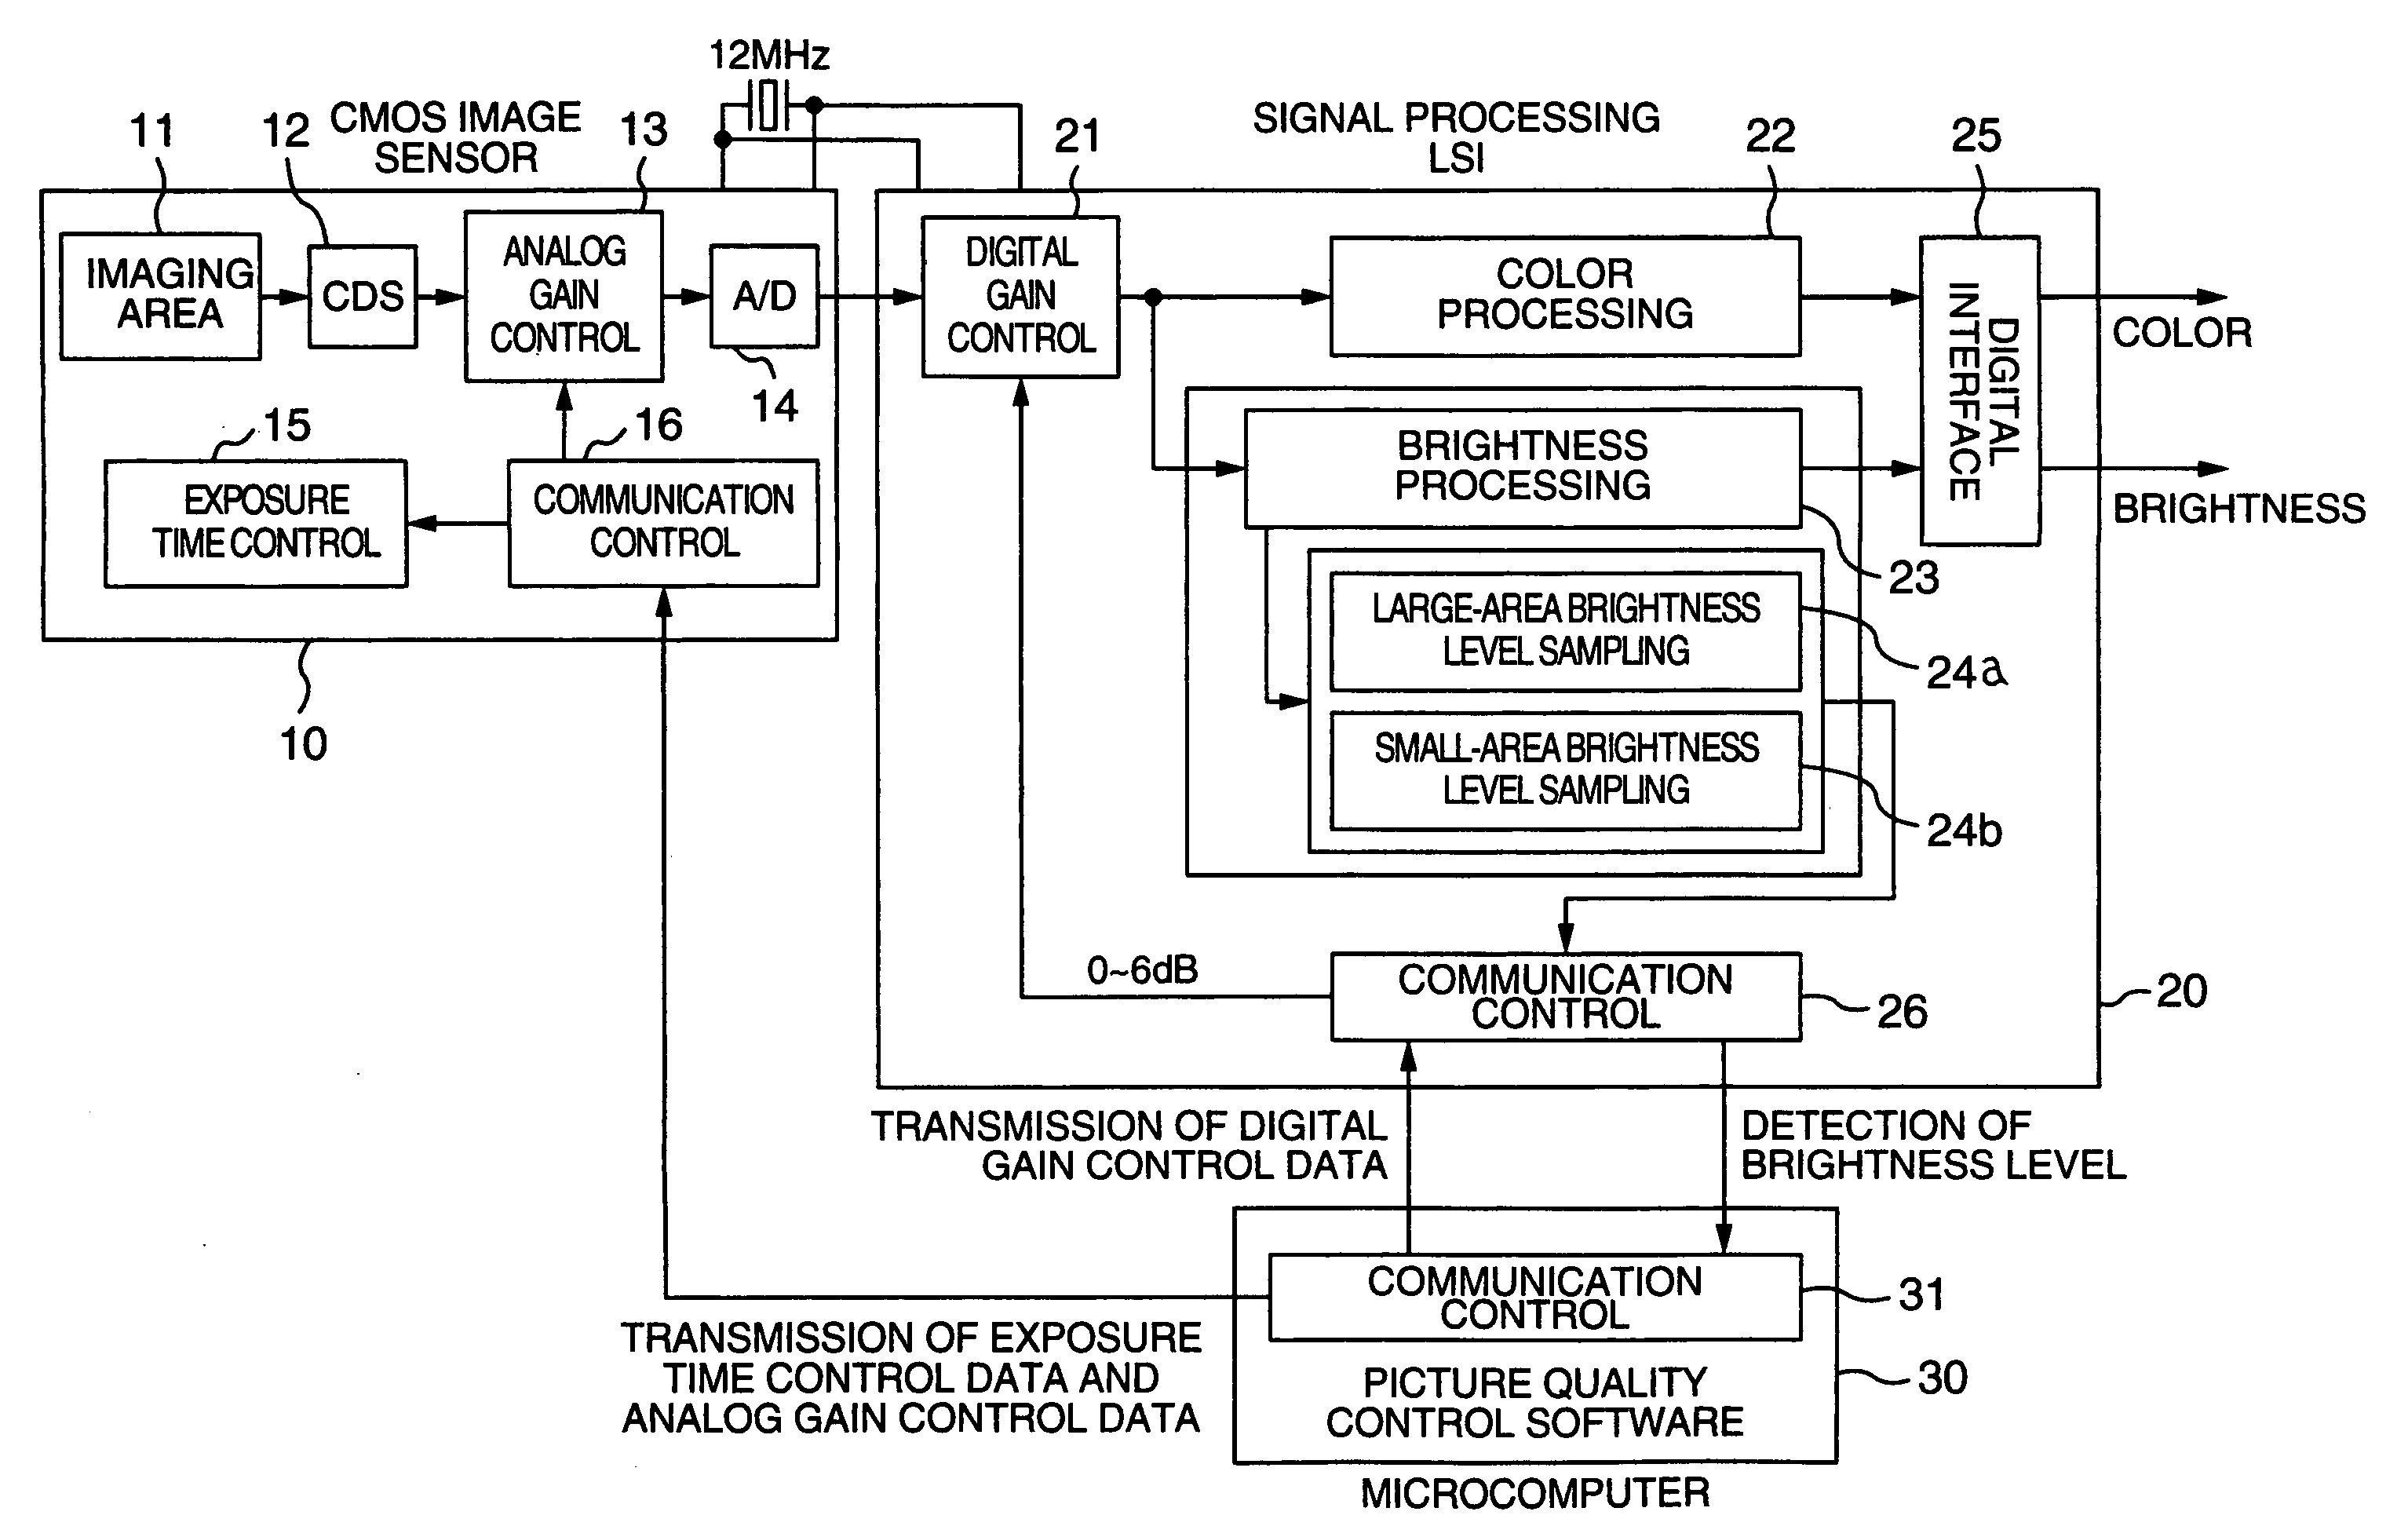 Imaging system using solid-state CMOS imaging device